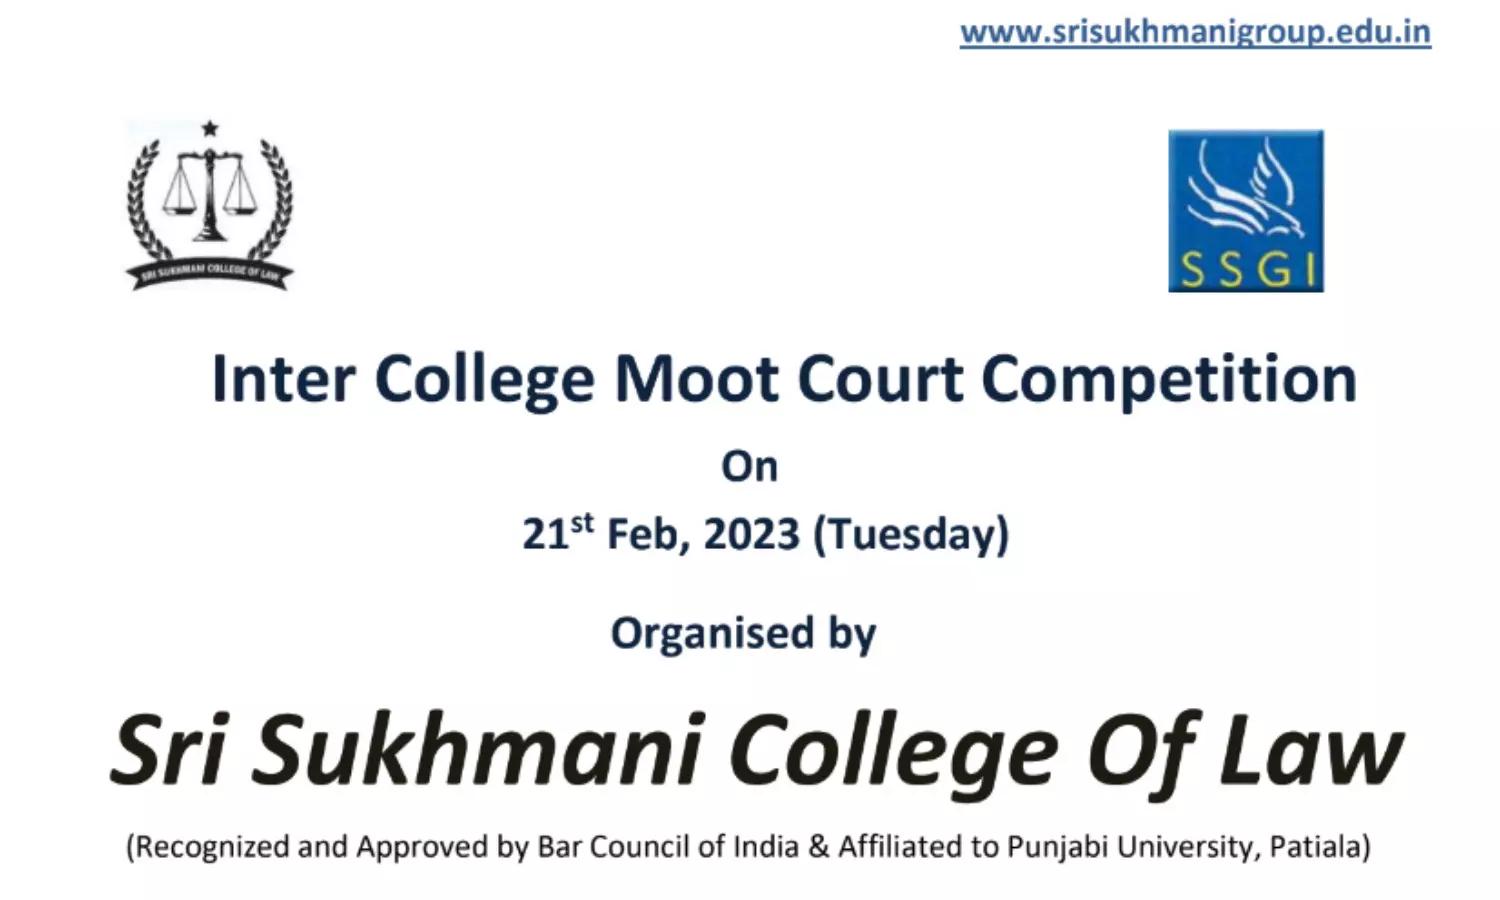 1st SSCL Inter College Moot Court Competition 2023 | Sri Sukhmani College of Law | 21st February 2023